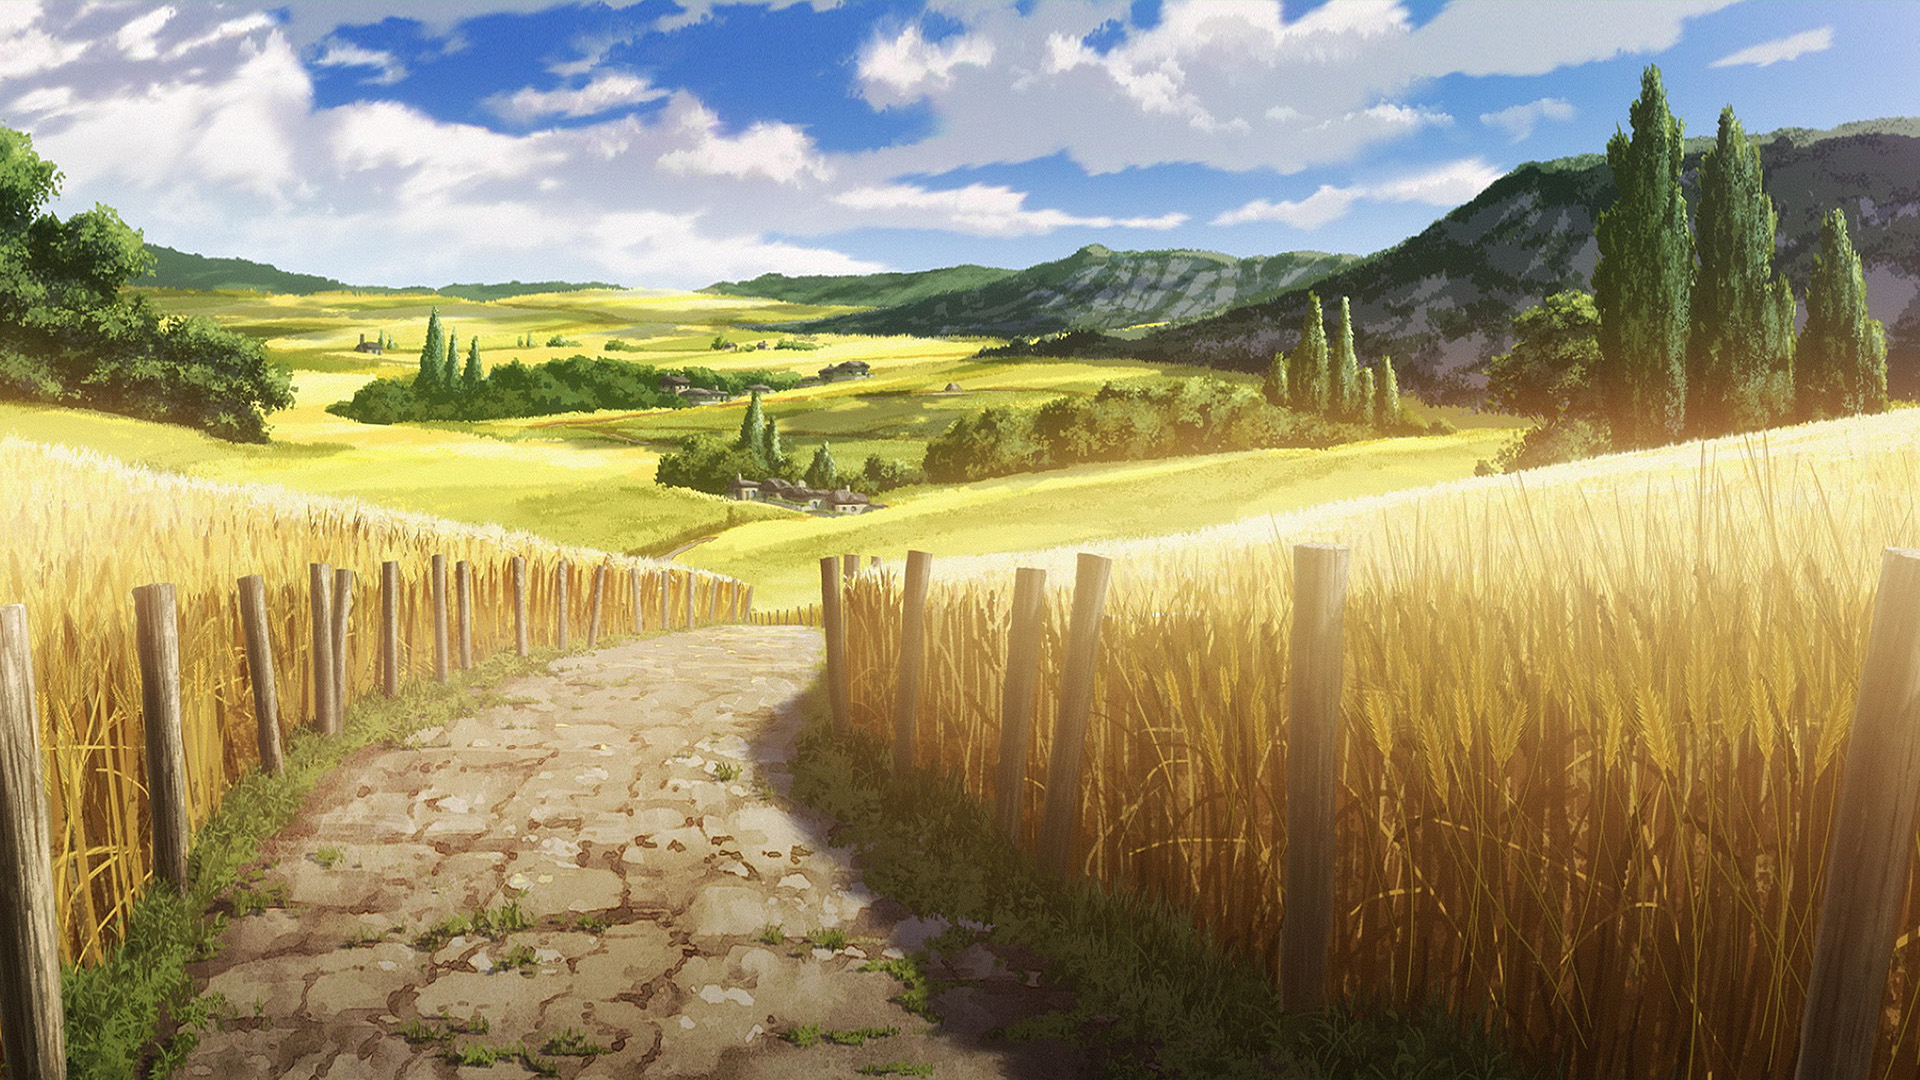 Maquia: When The Promised Flower Blooms Wallpapers